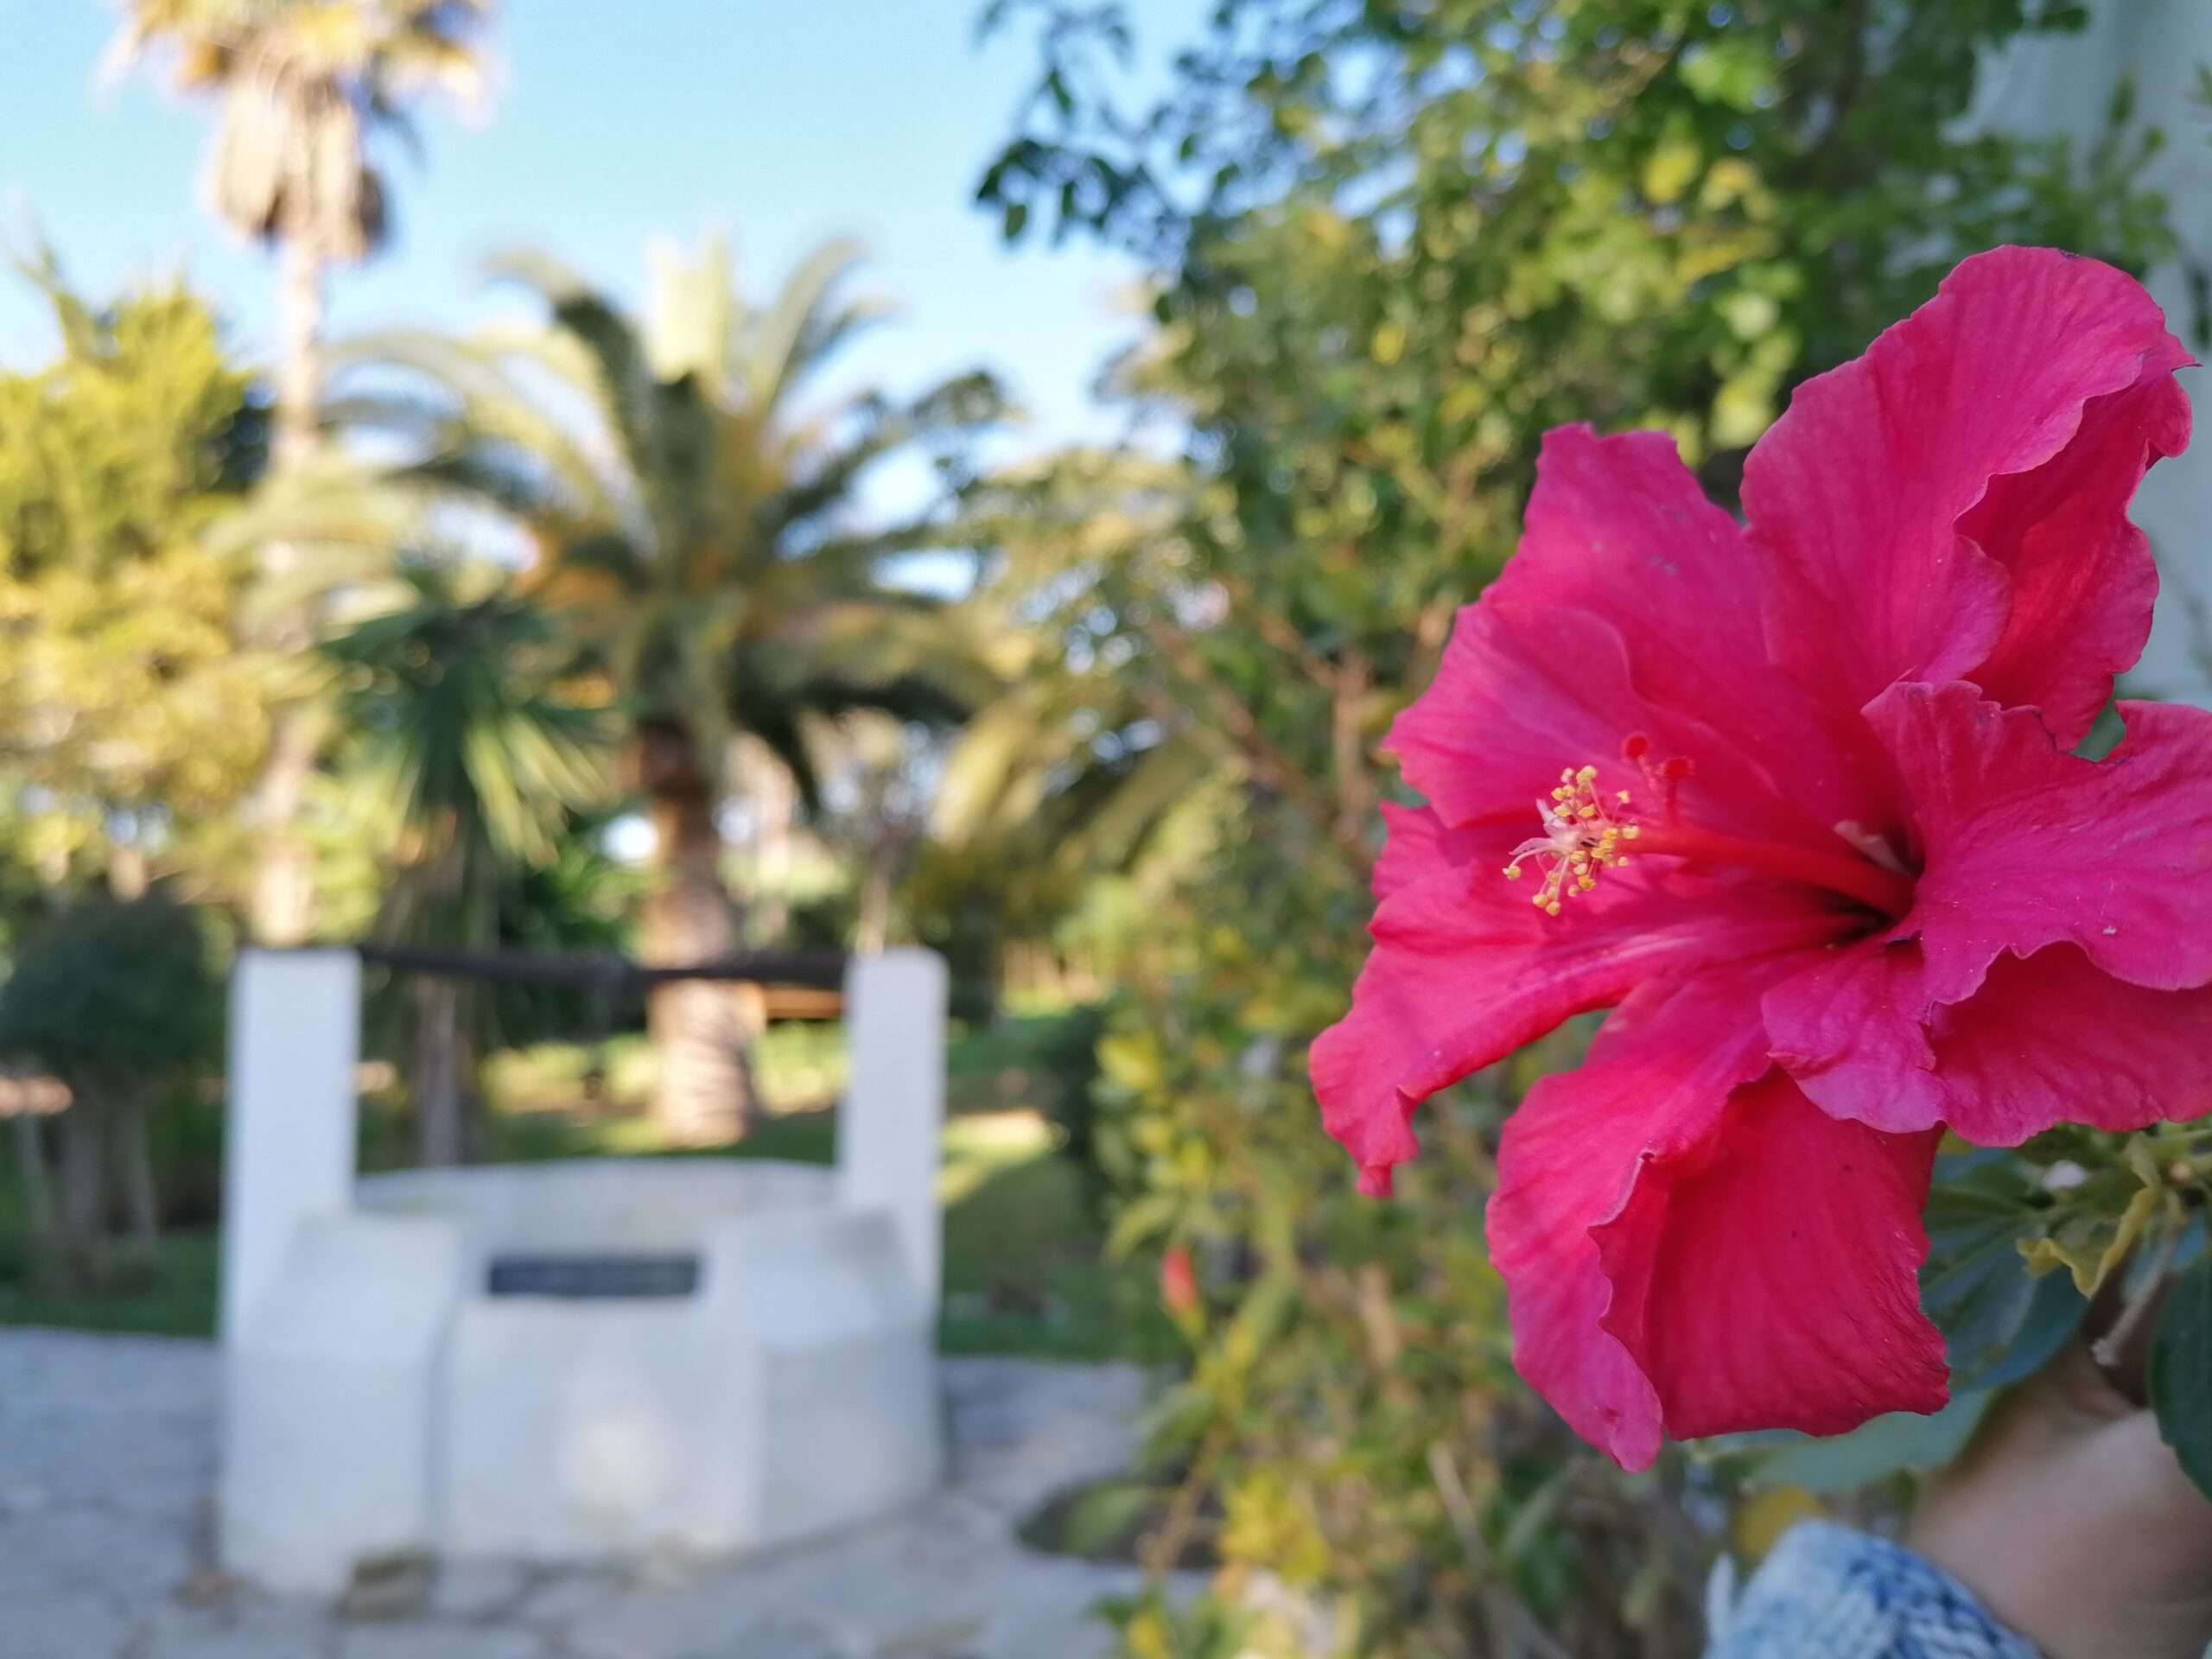 pink hibiscus flower, out of focus a well and palms in the back